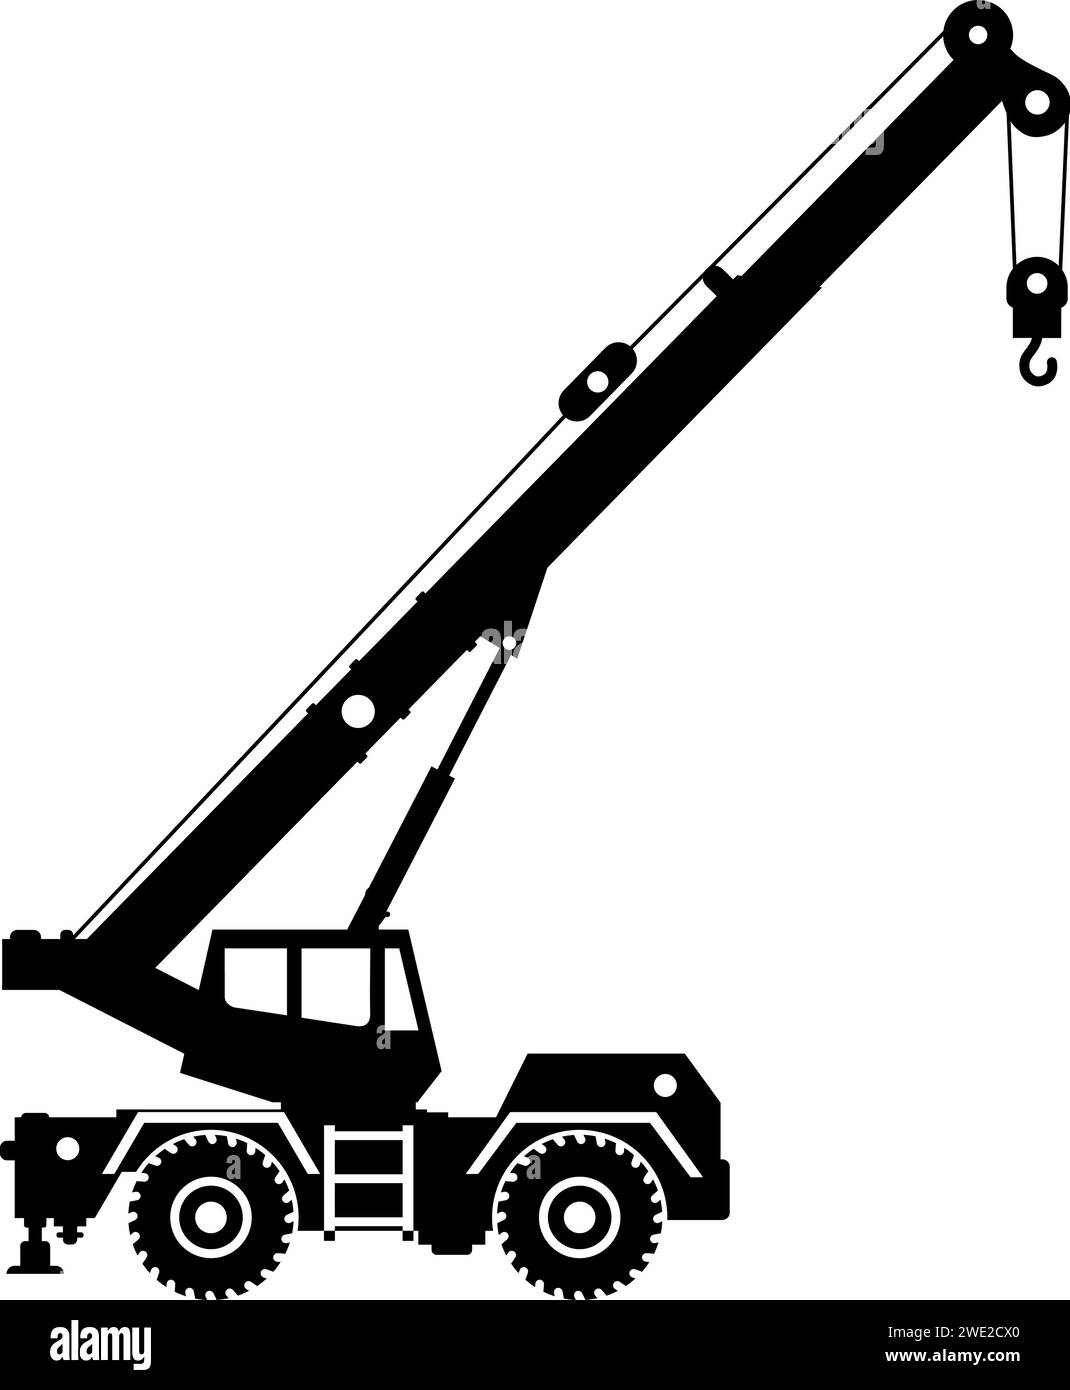 Silhouette of Mobile Crane Icon in Flat Style. Stock Vector